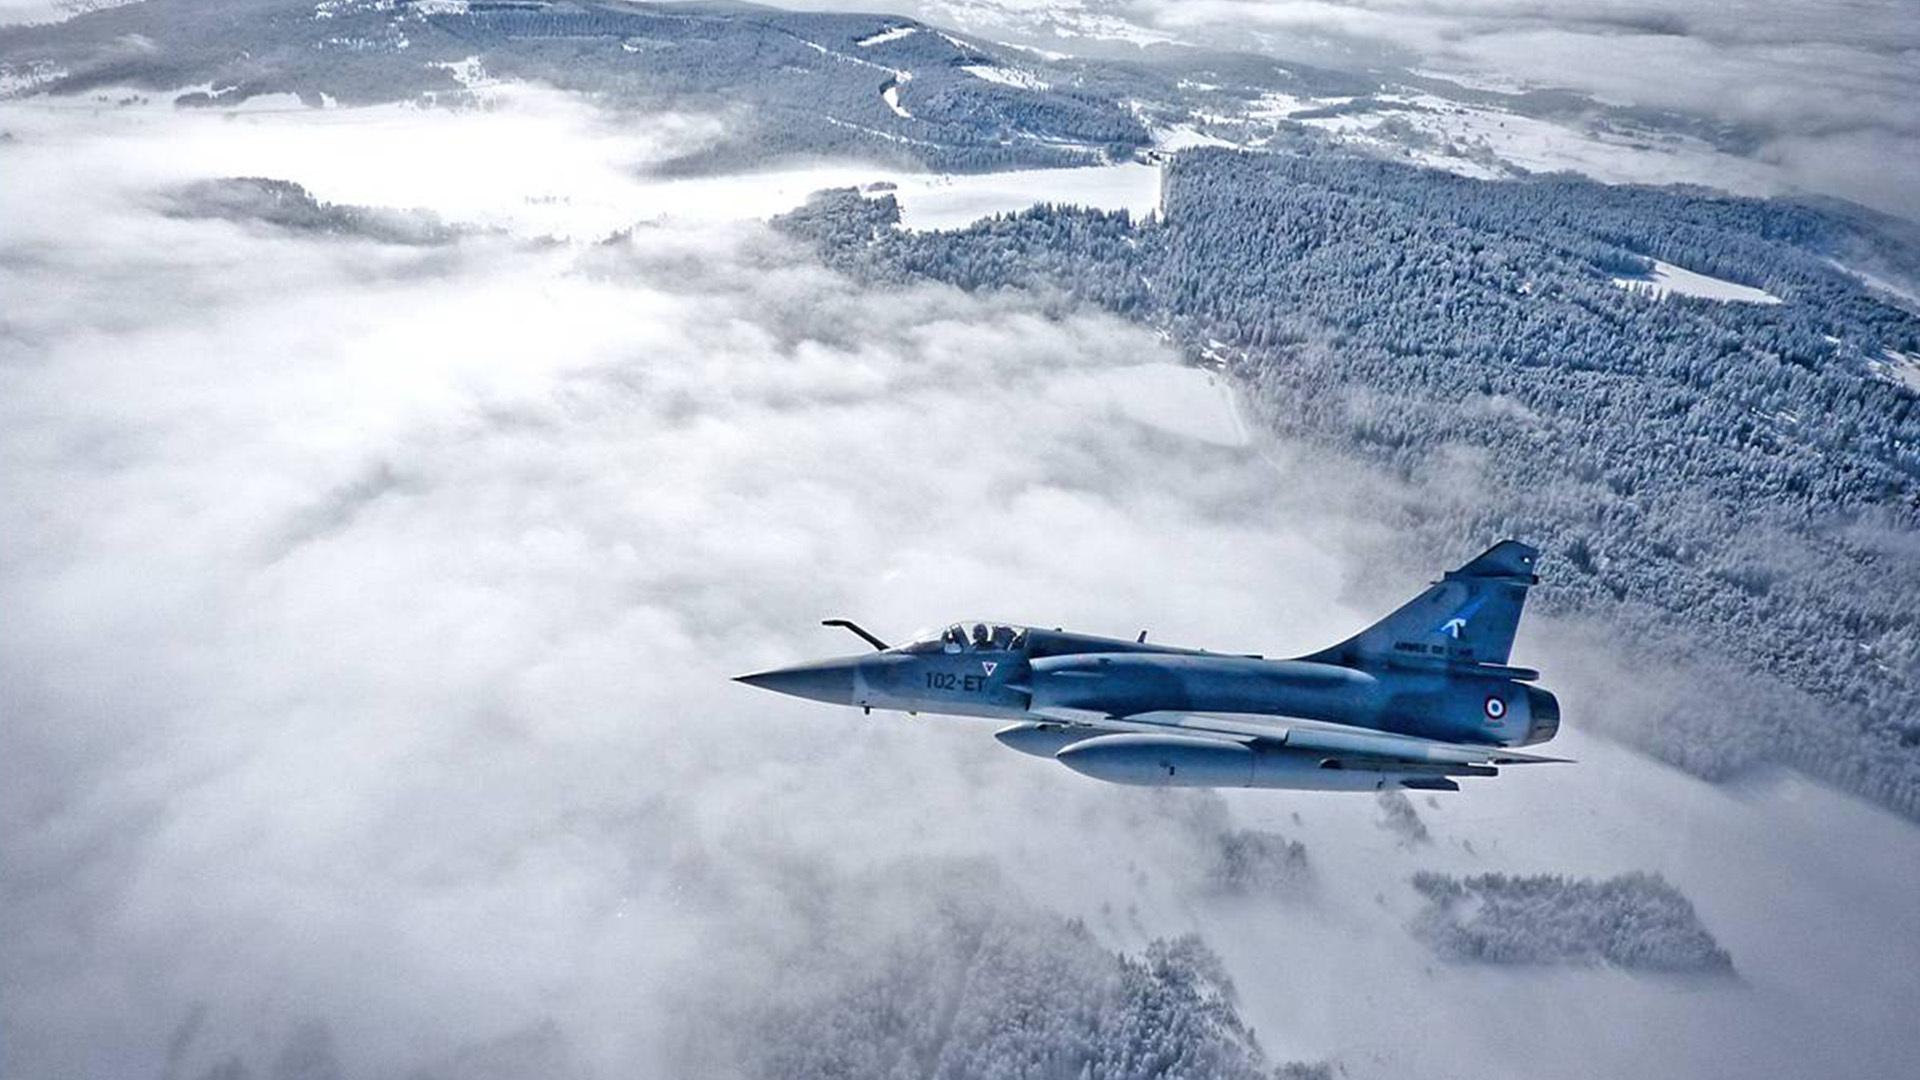 French mirage fighter plane over forest in winter - (#150182 ...